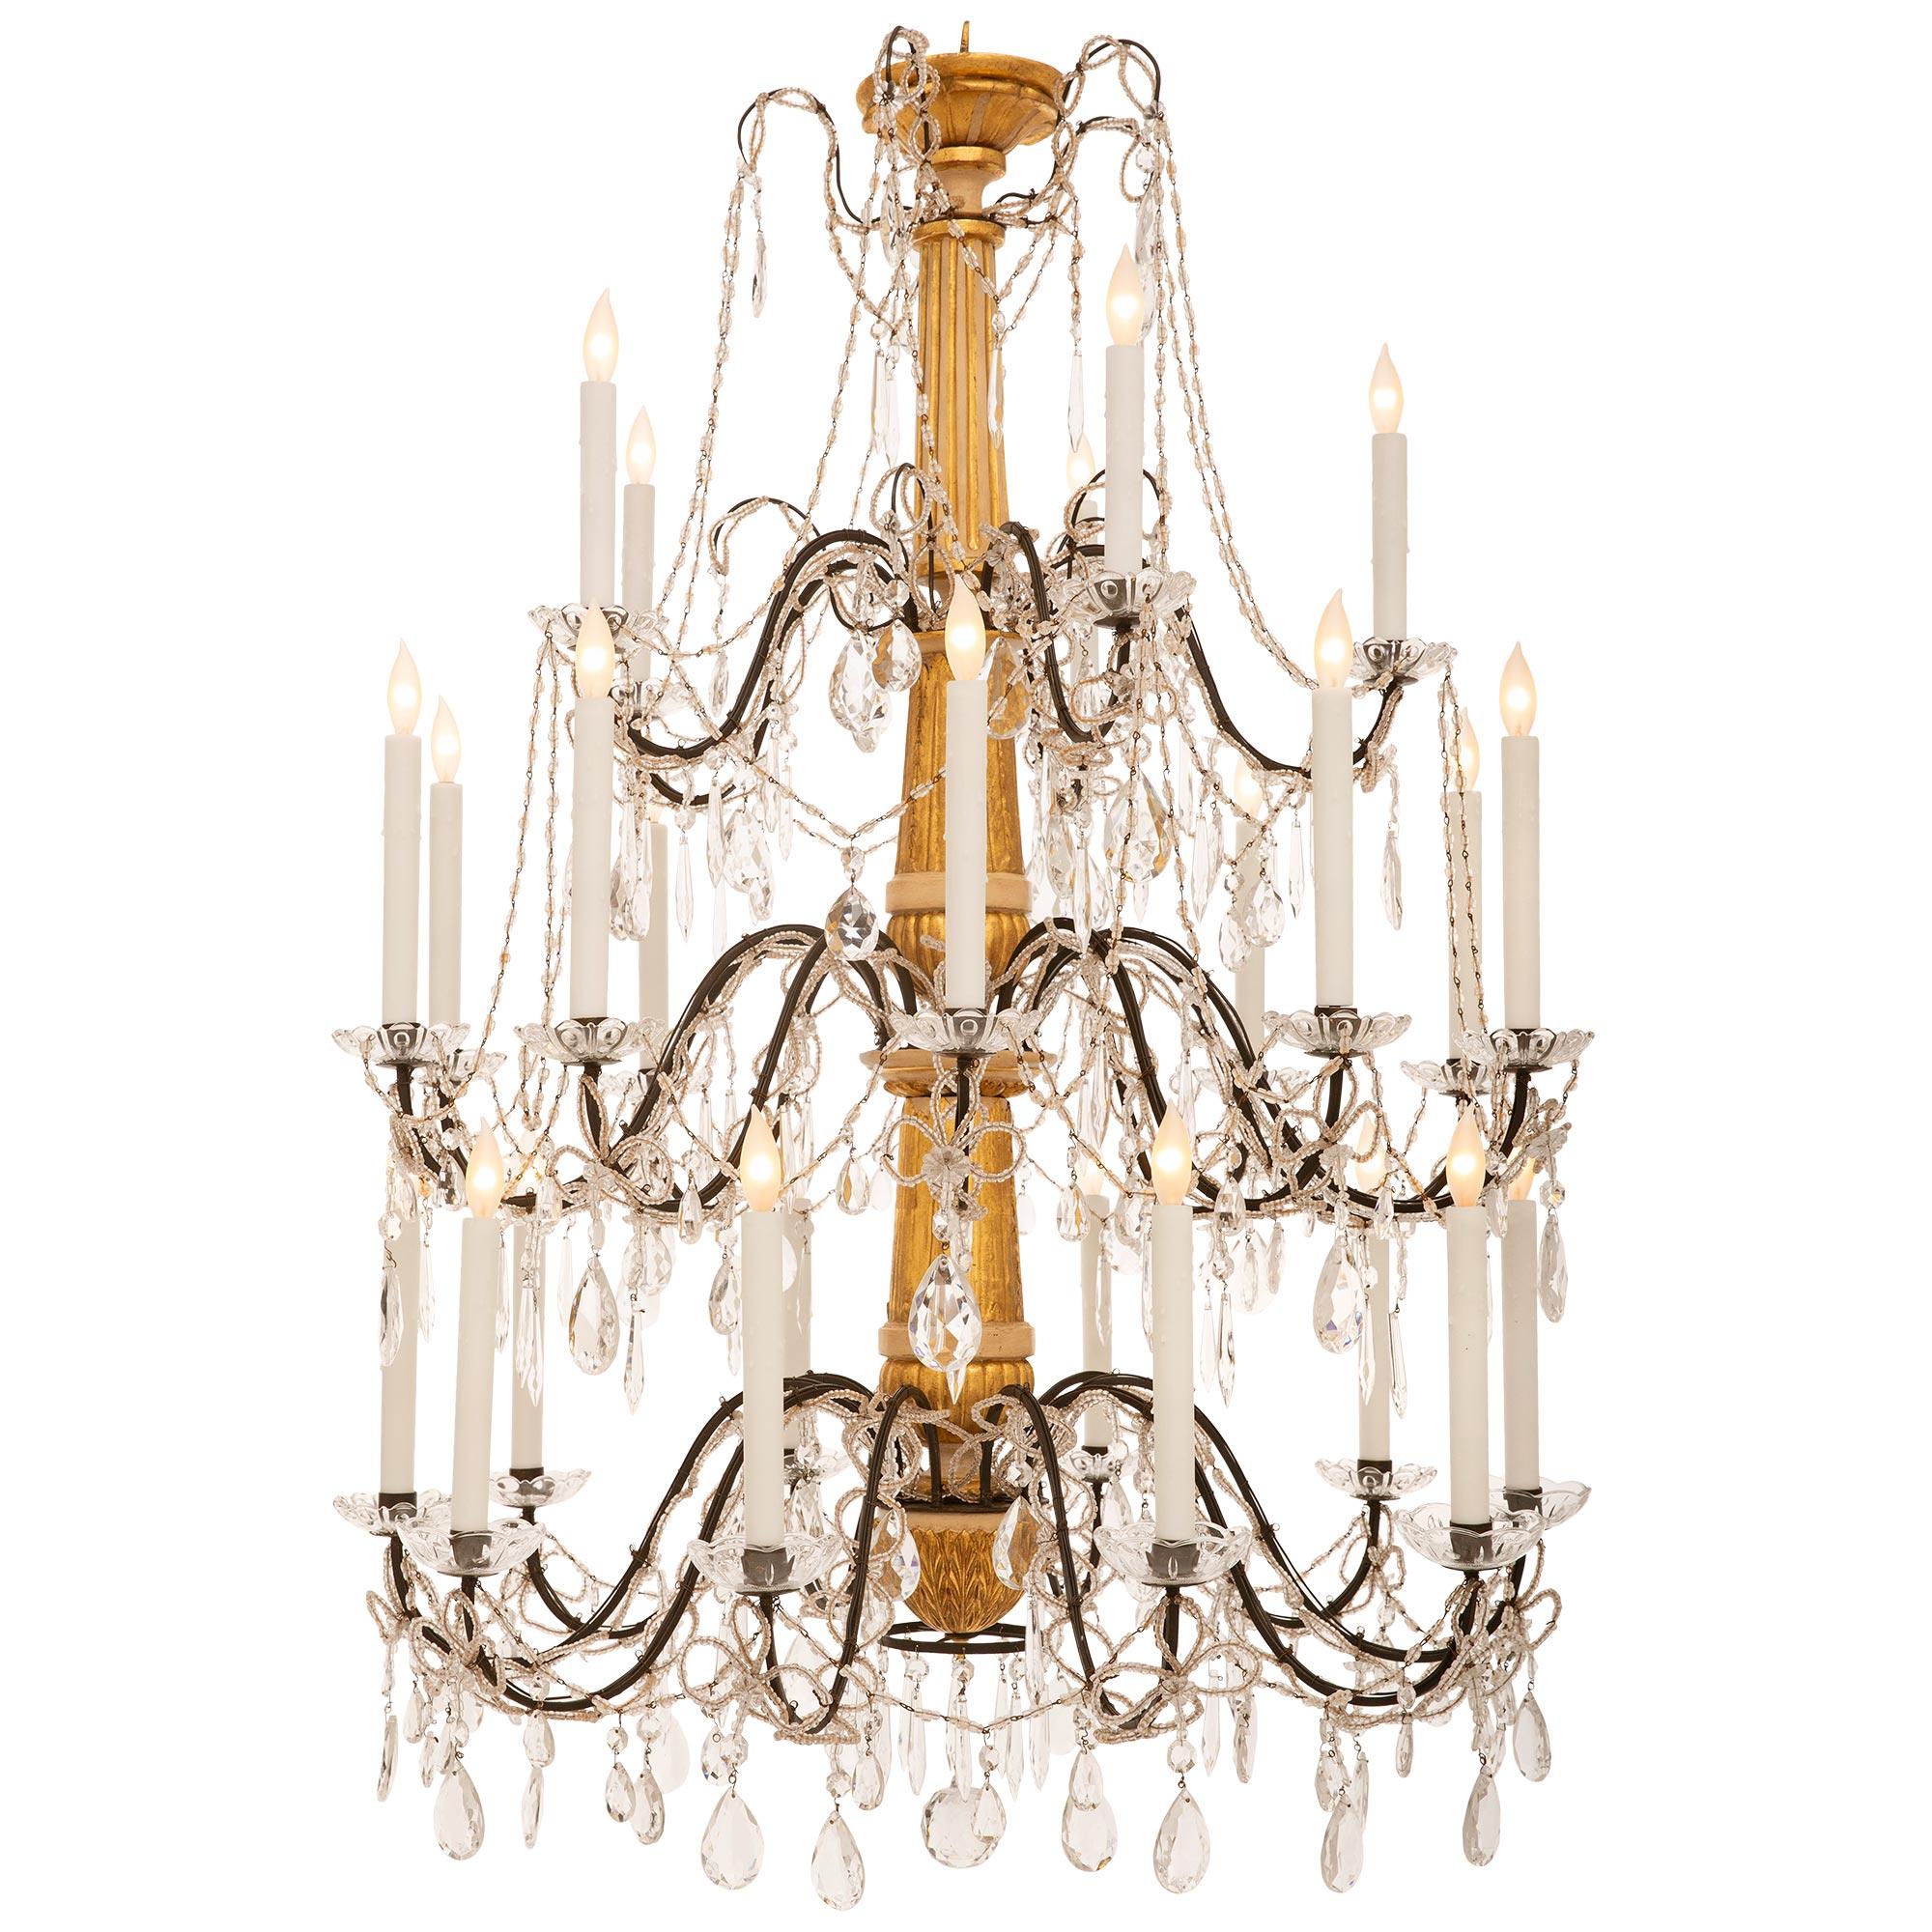 Italian 19th Century Giltwood, Patinated Wood, Iron And Crystal Chandelier In Good Condition For Sale In West Palm Beach, FL